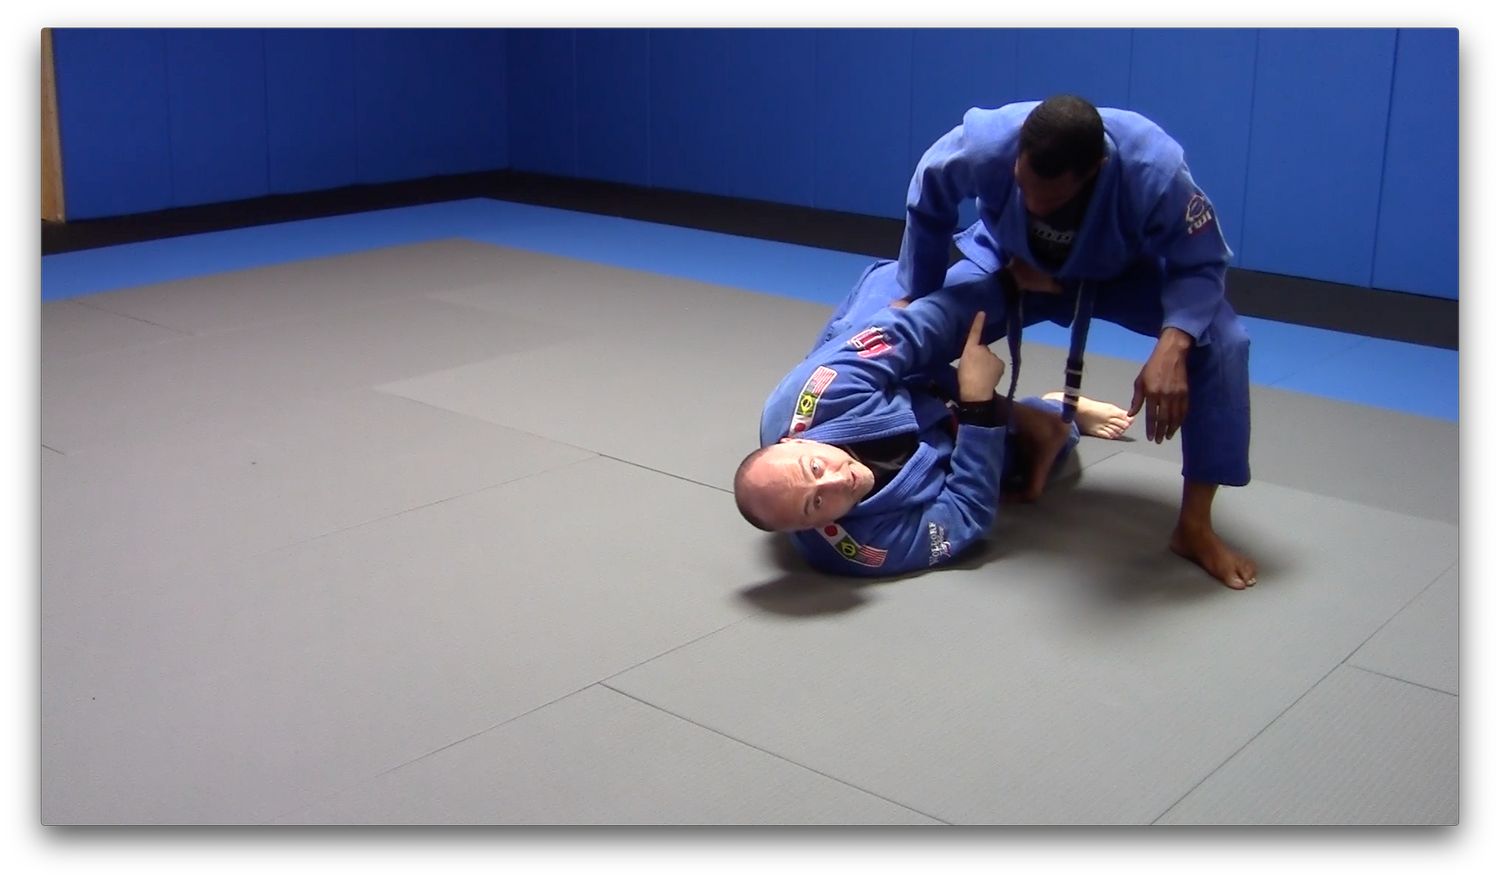 Escaping Knee on Belly and Reverse Knee on Belly with Ante Dzolic (On Demand) - Budovideos Inc